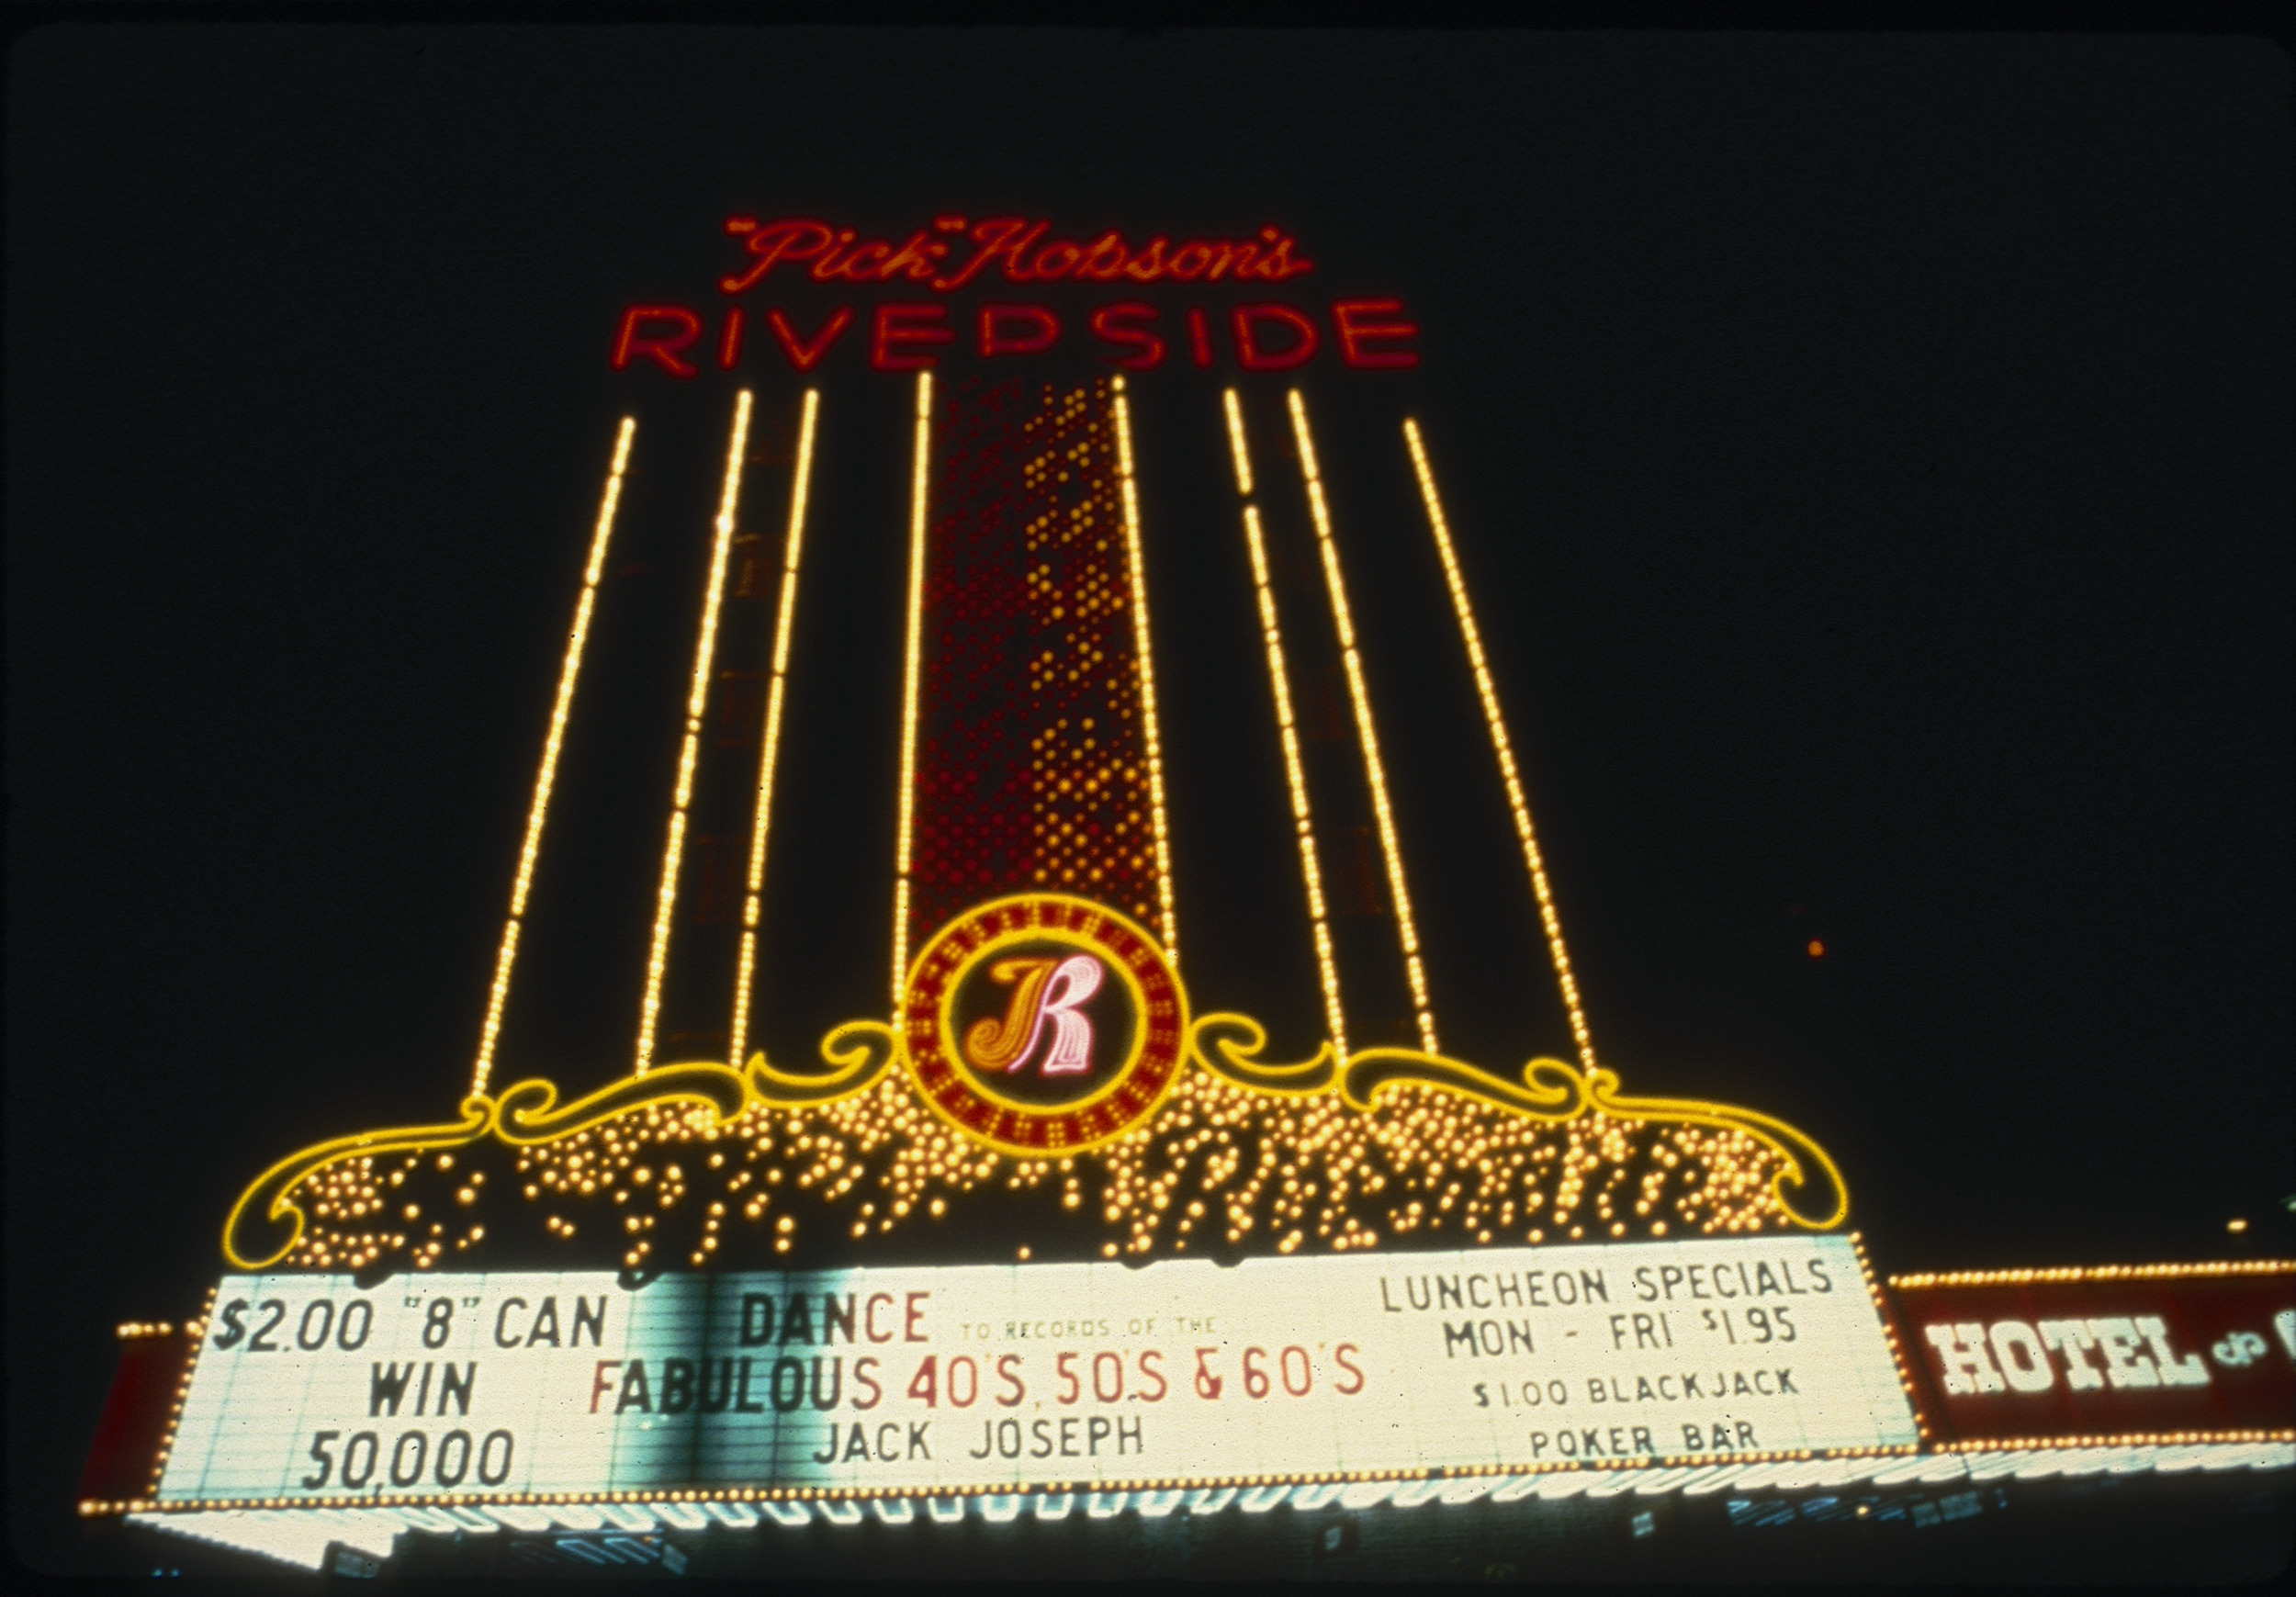 Slide of the neon sign for the Riverside Hotel, Reno, Nevada, 1986